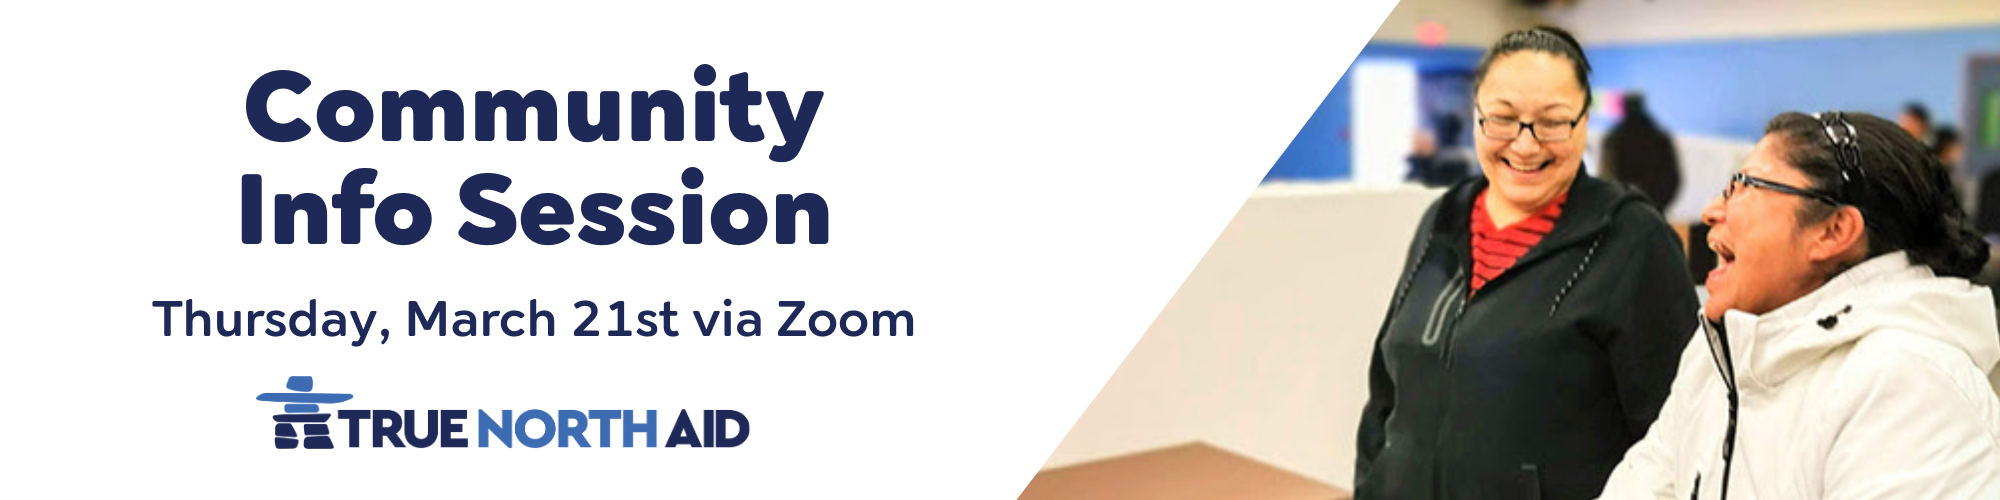 Zoom community info session banner